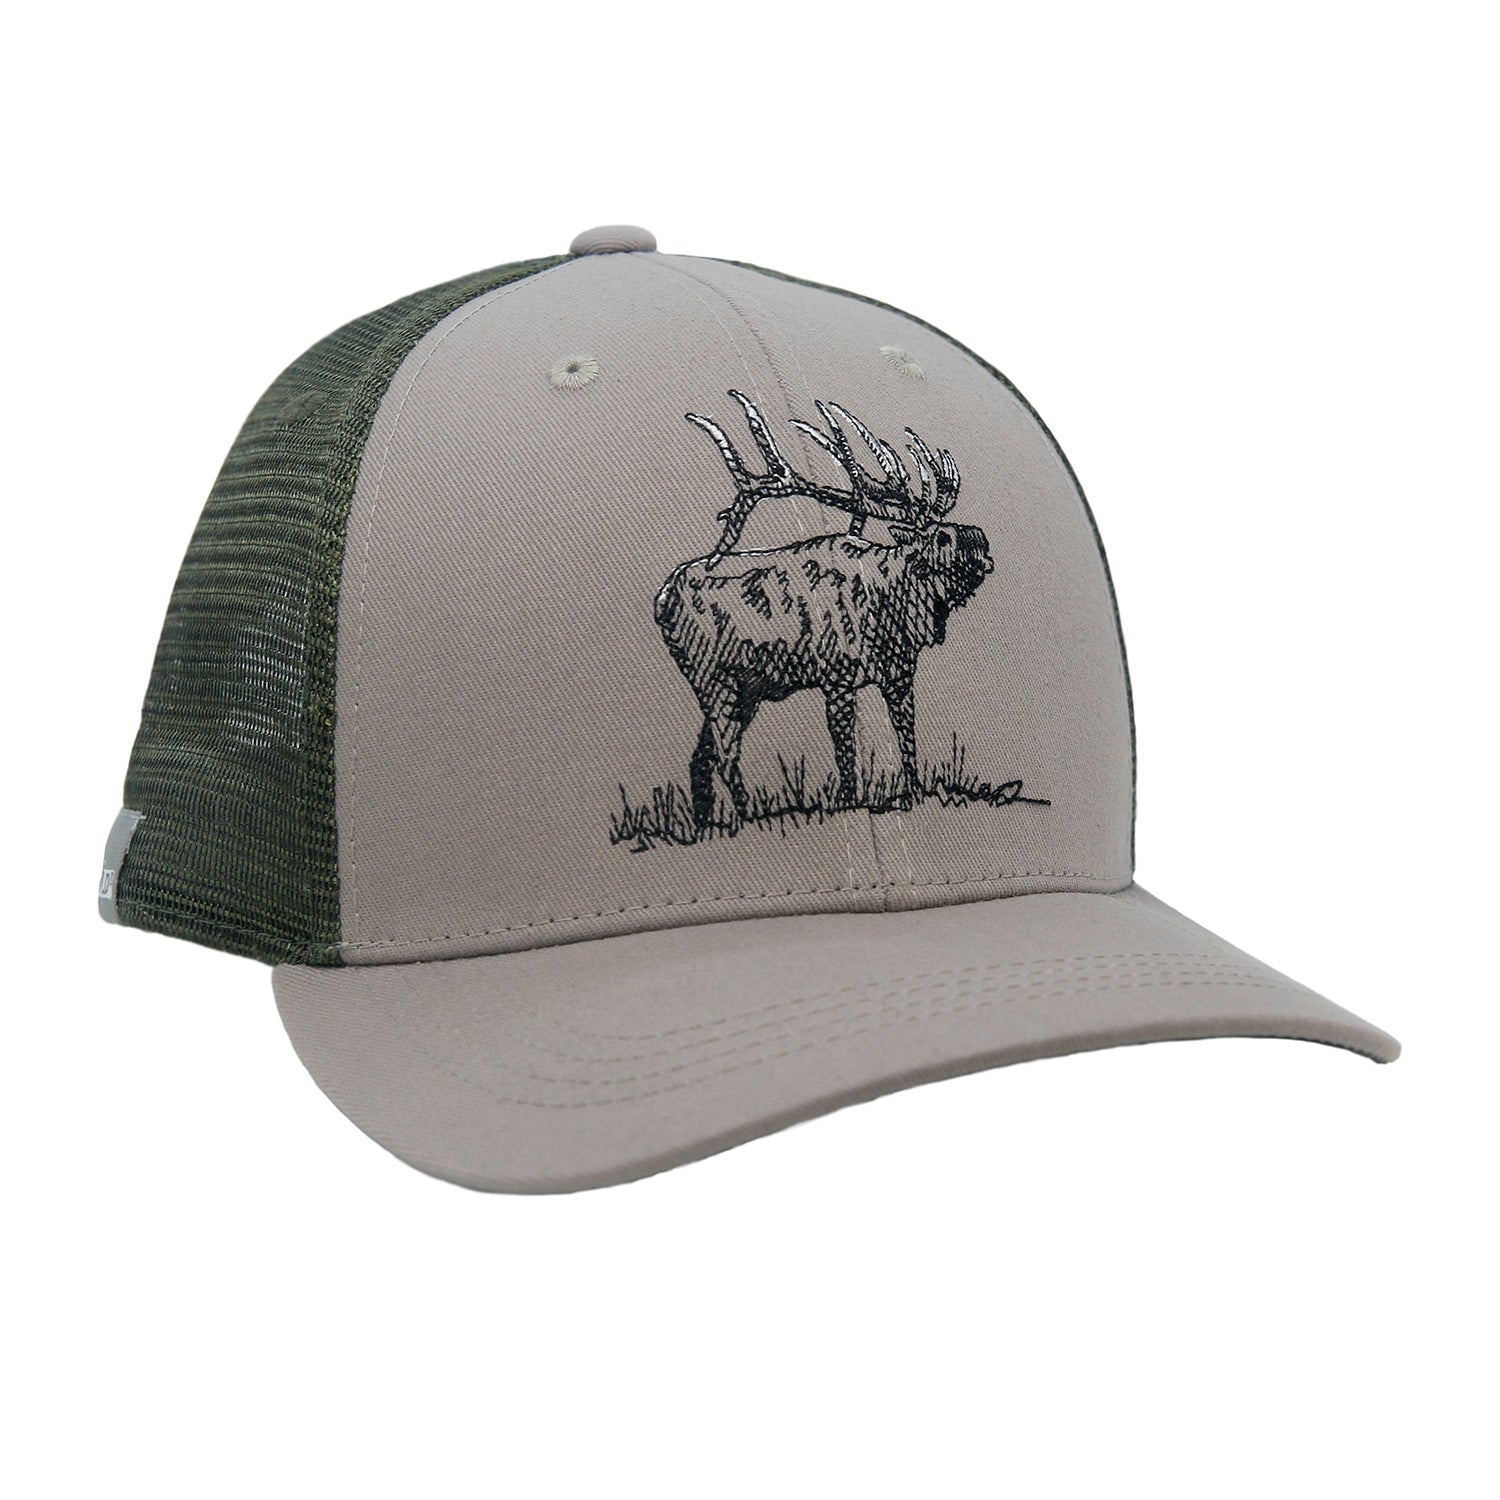 A hat with green mesh in back and gray fabric in front features a bugling elk